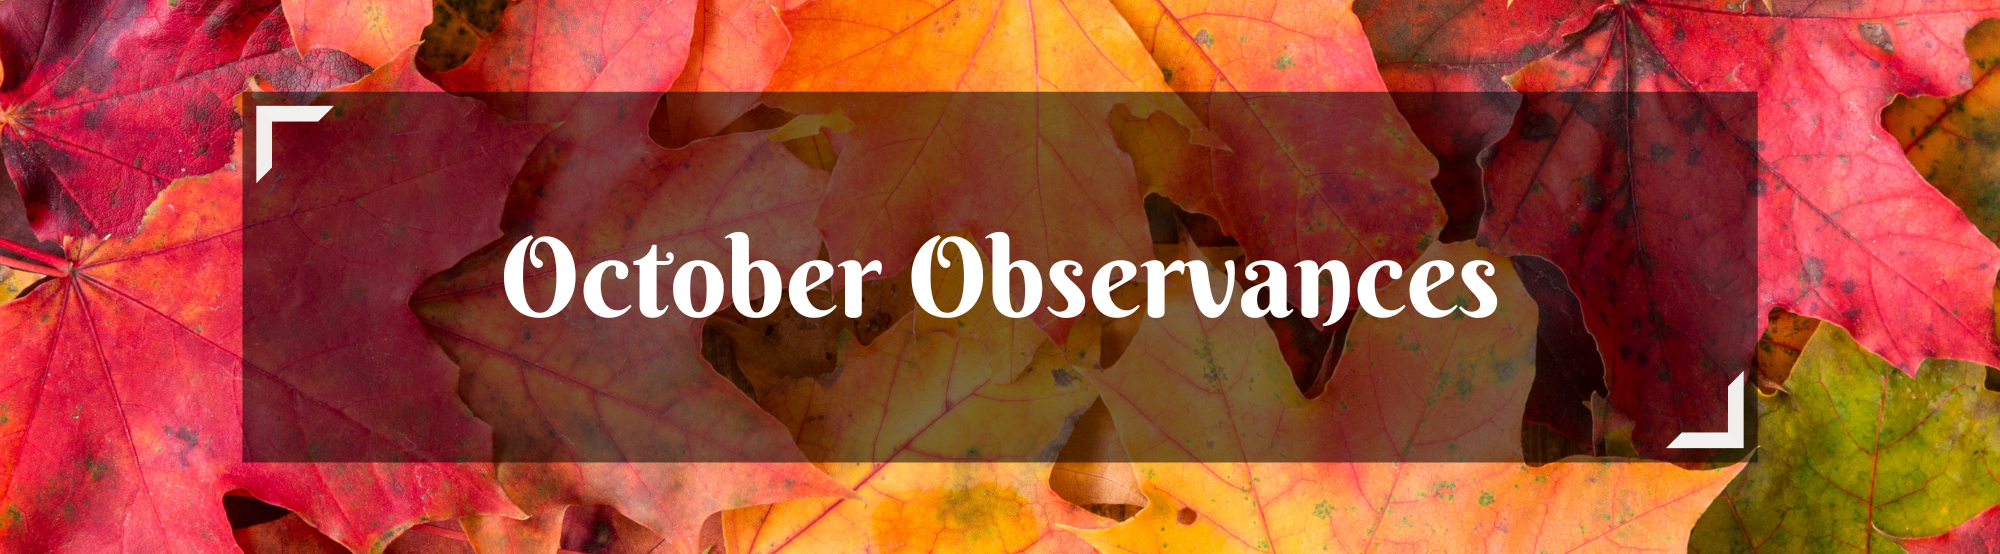 Image of a pile of fall leaves with the text October Observances